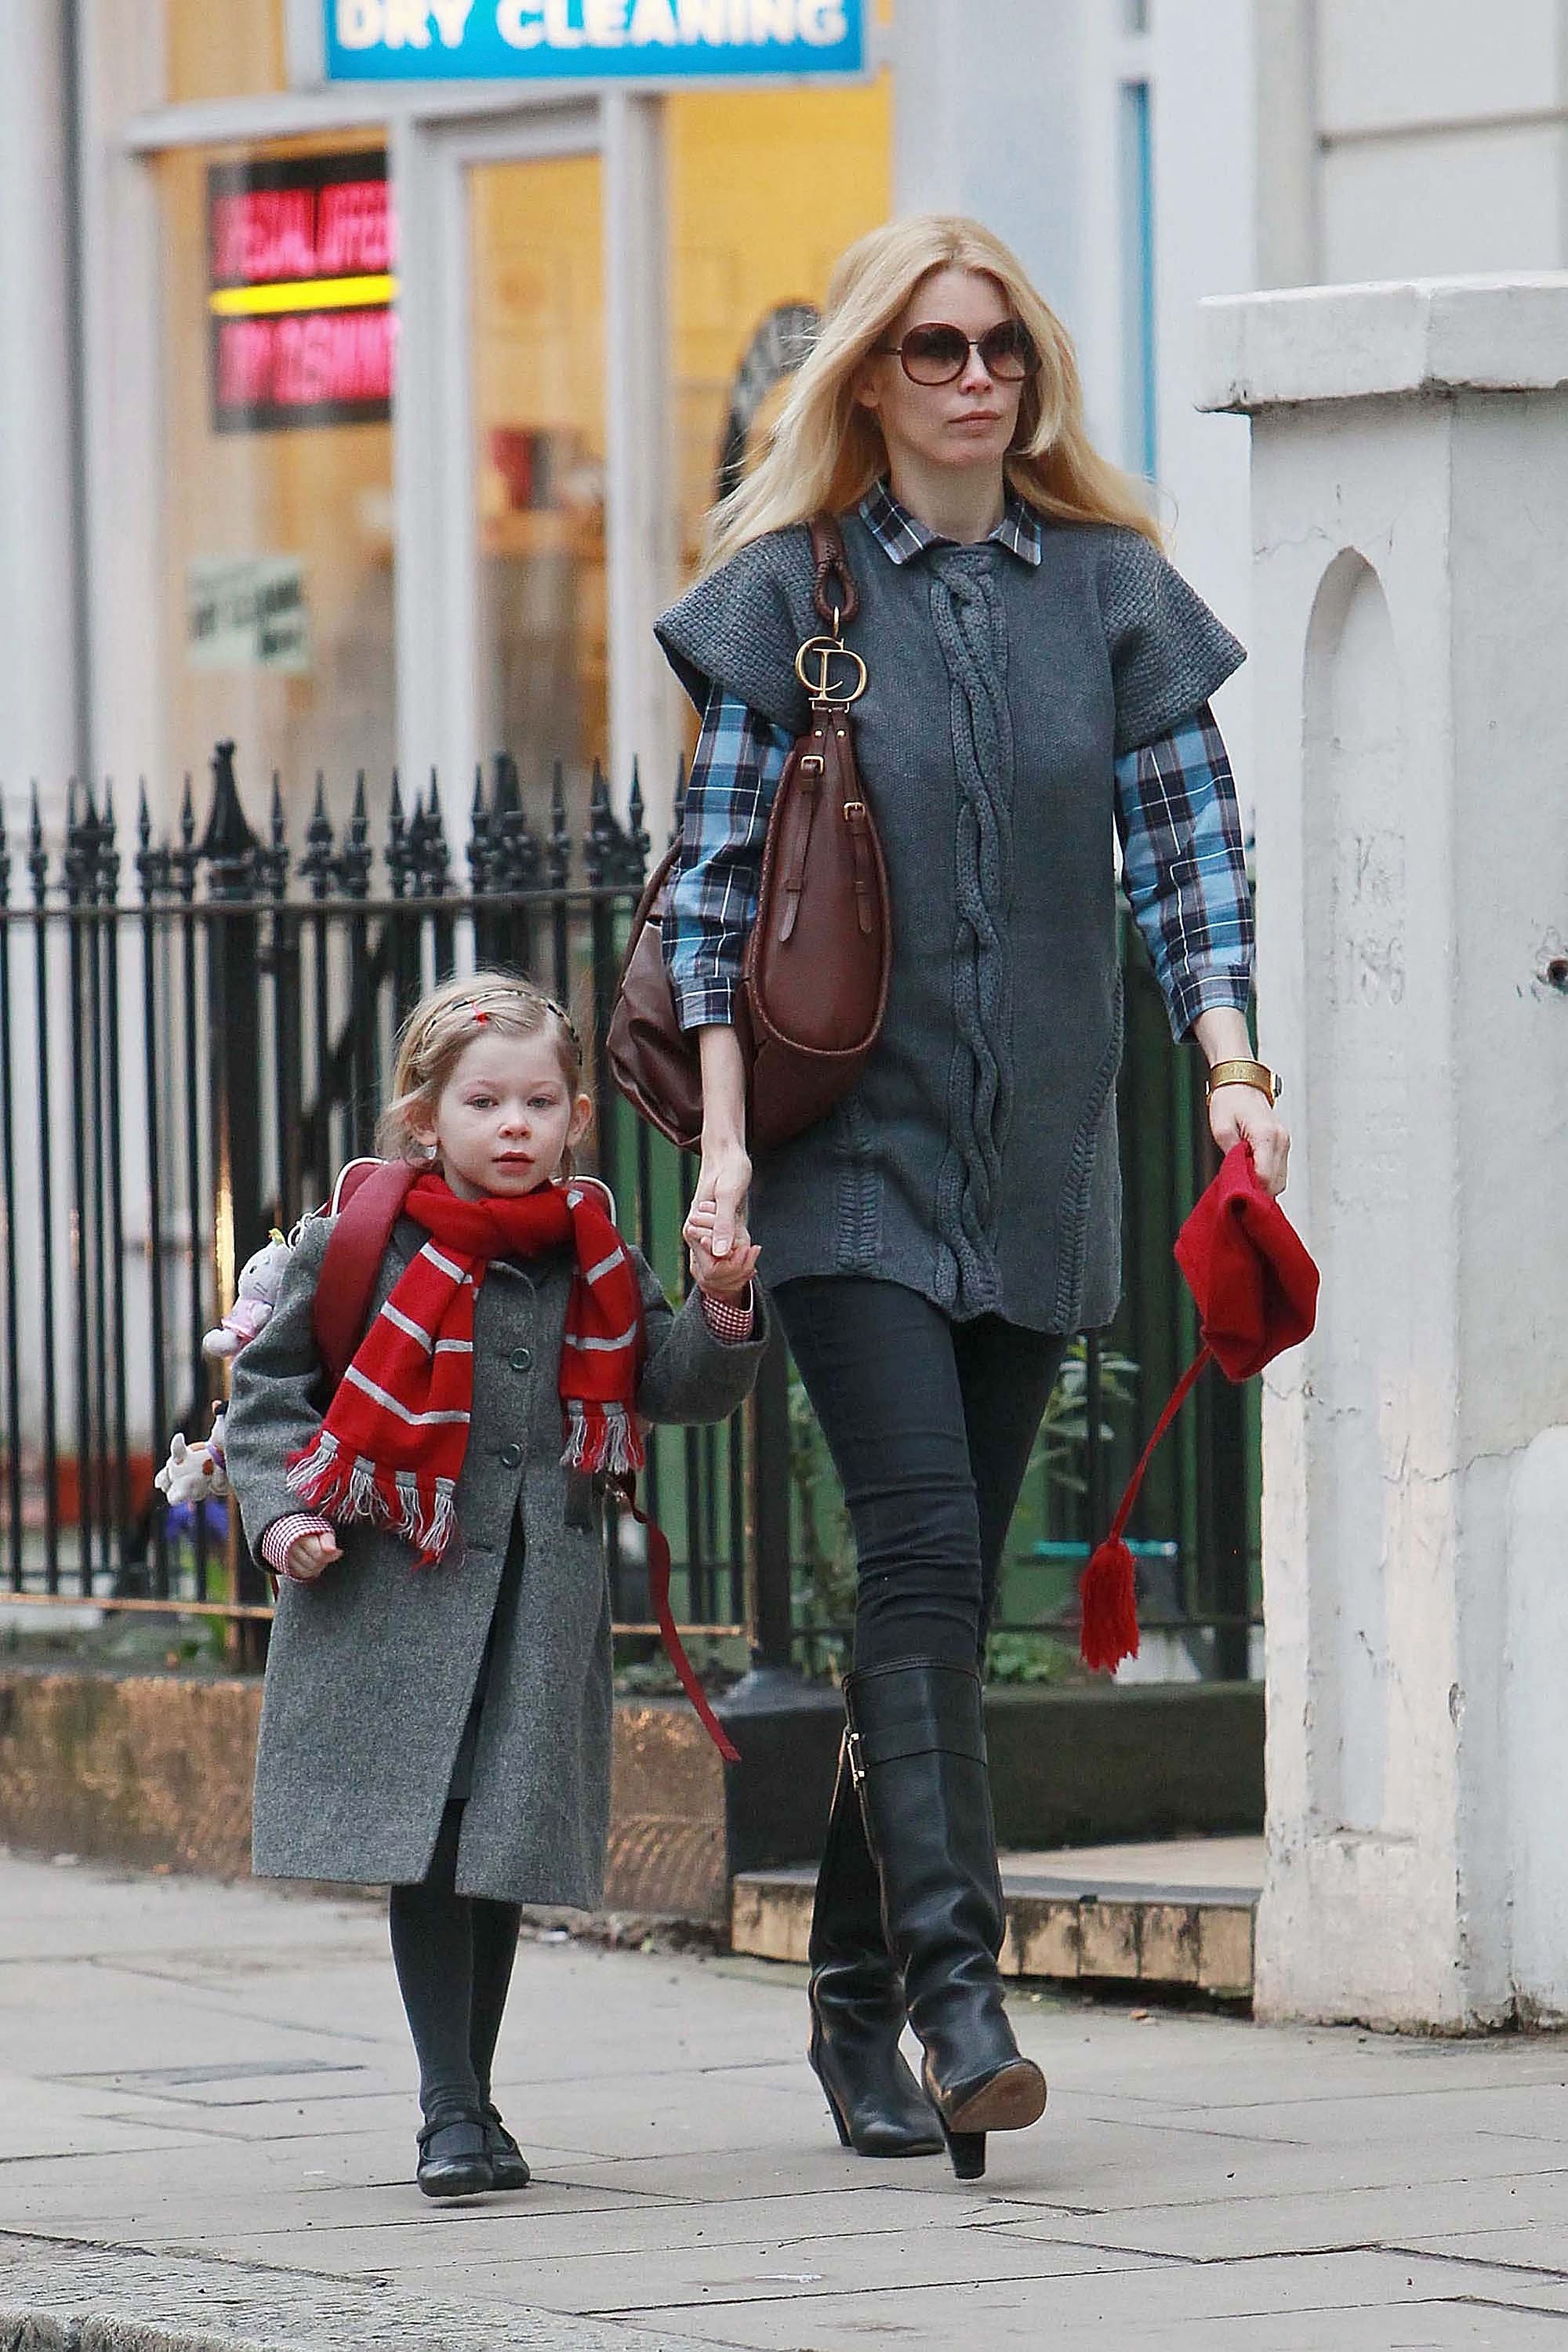 Claudia Schiffer and her daughter Clementine Poppy De Vere Drummond stroll down the street, on January 21, 2011, in London, United Kingdom. | Source: Getty Images